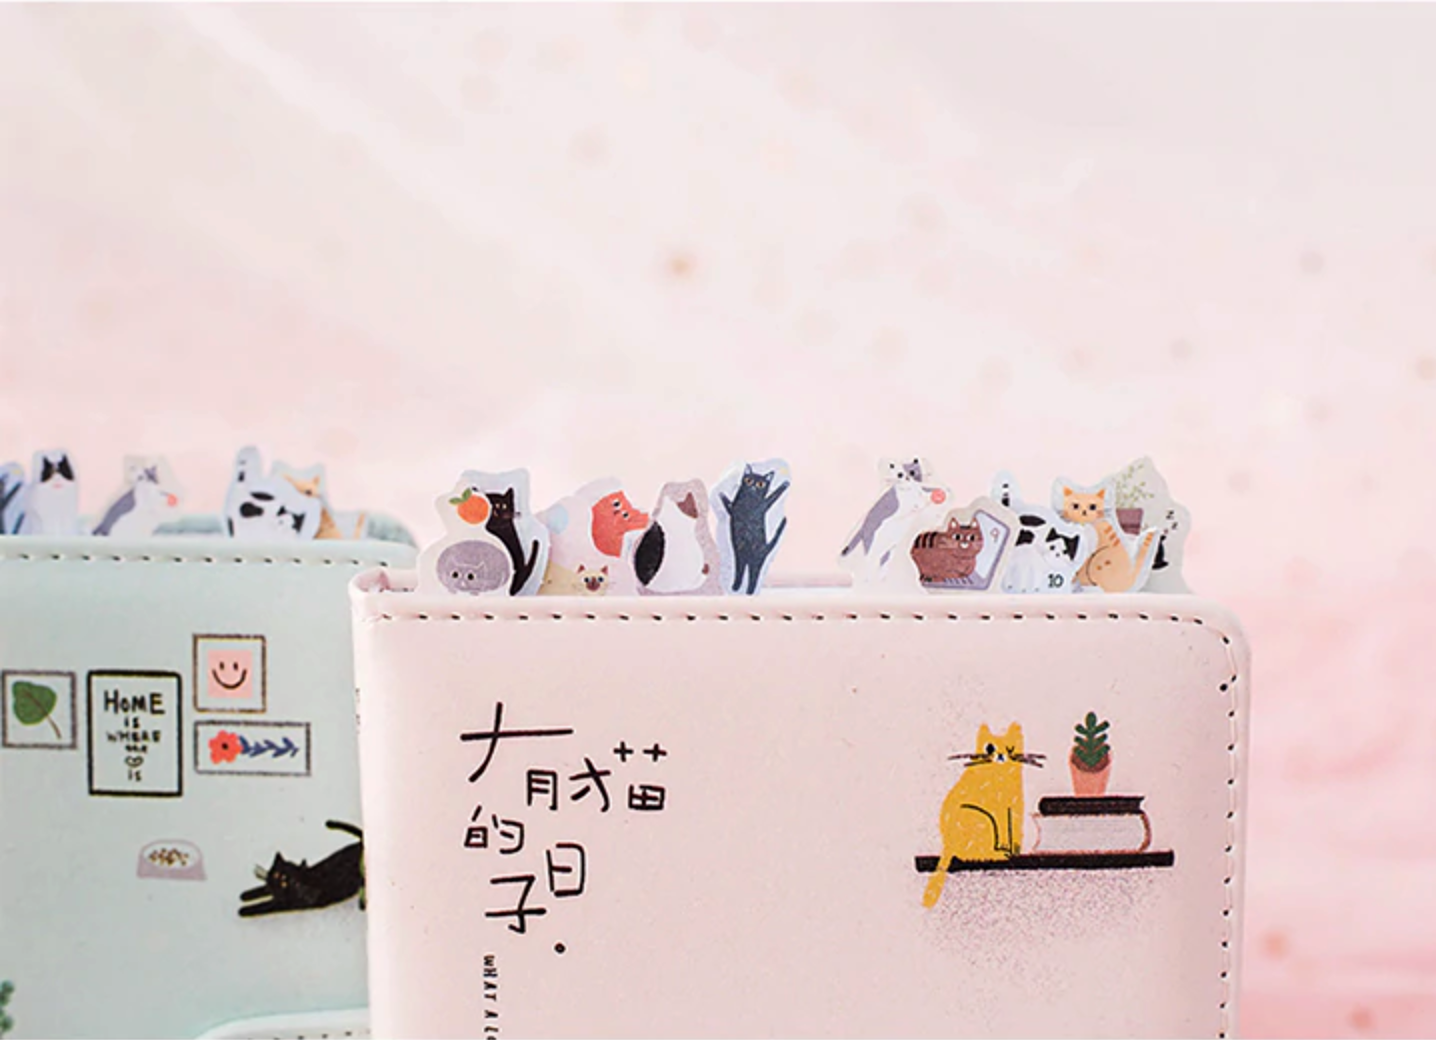 Home Is Where the Cat Is' Undated Journal - Kawaii Pen Shop - Cutsy World